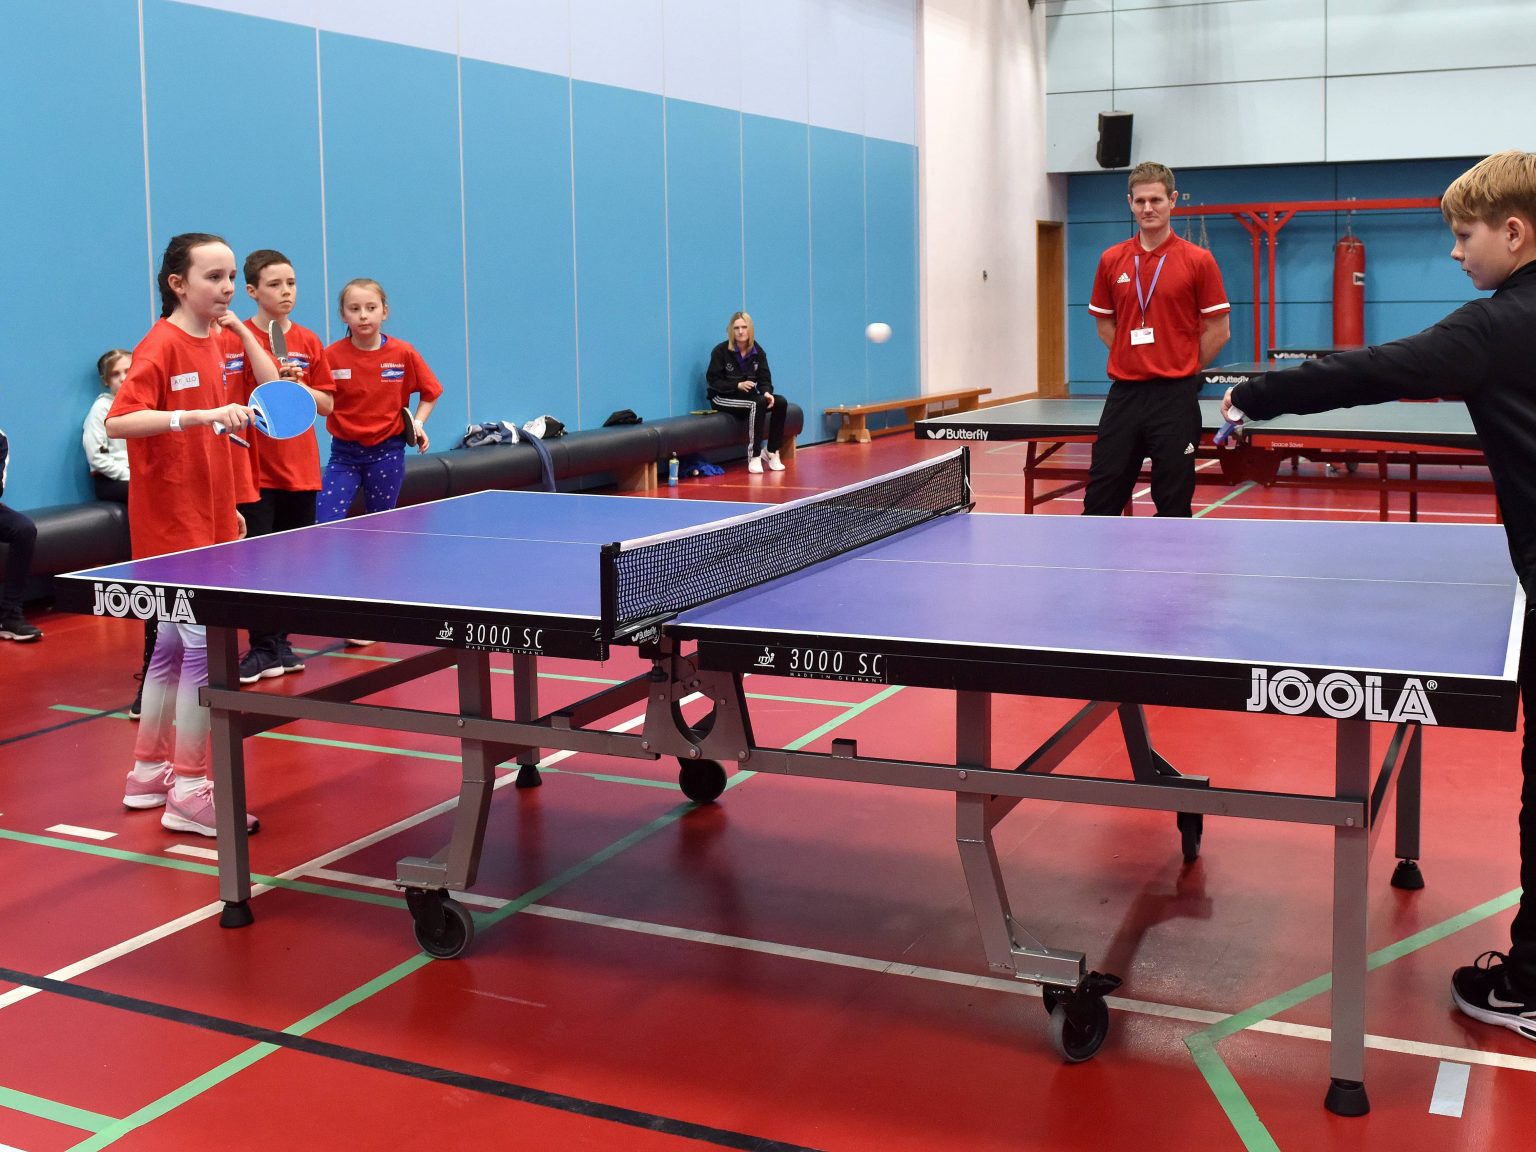 Grimsby pupils playing table tennis